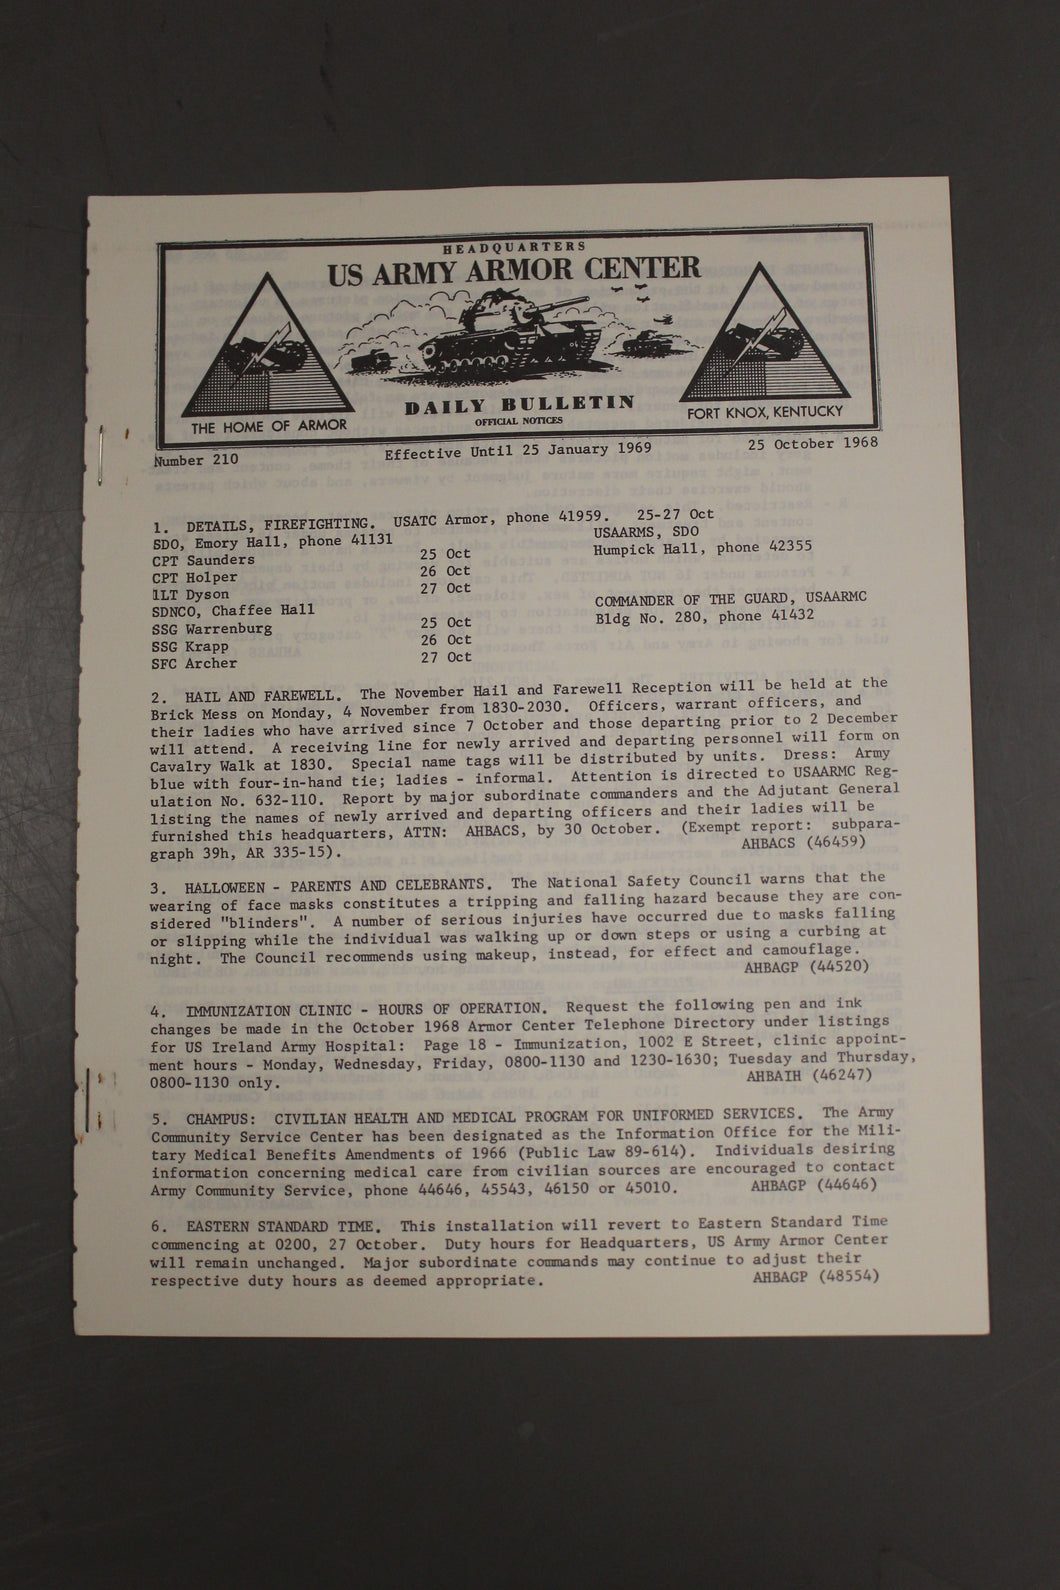 US Army Armor Center Daily Bulletin Official Notices, No 210, October 25, 1968